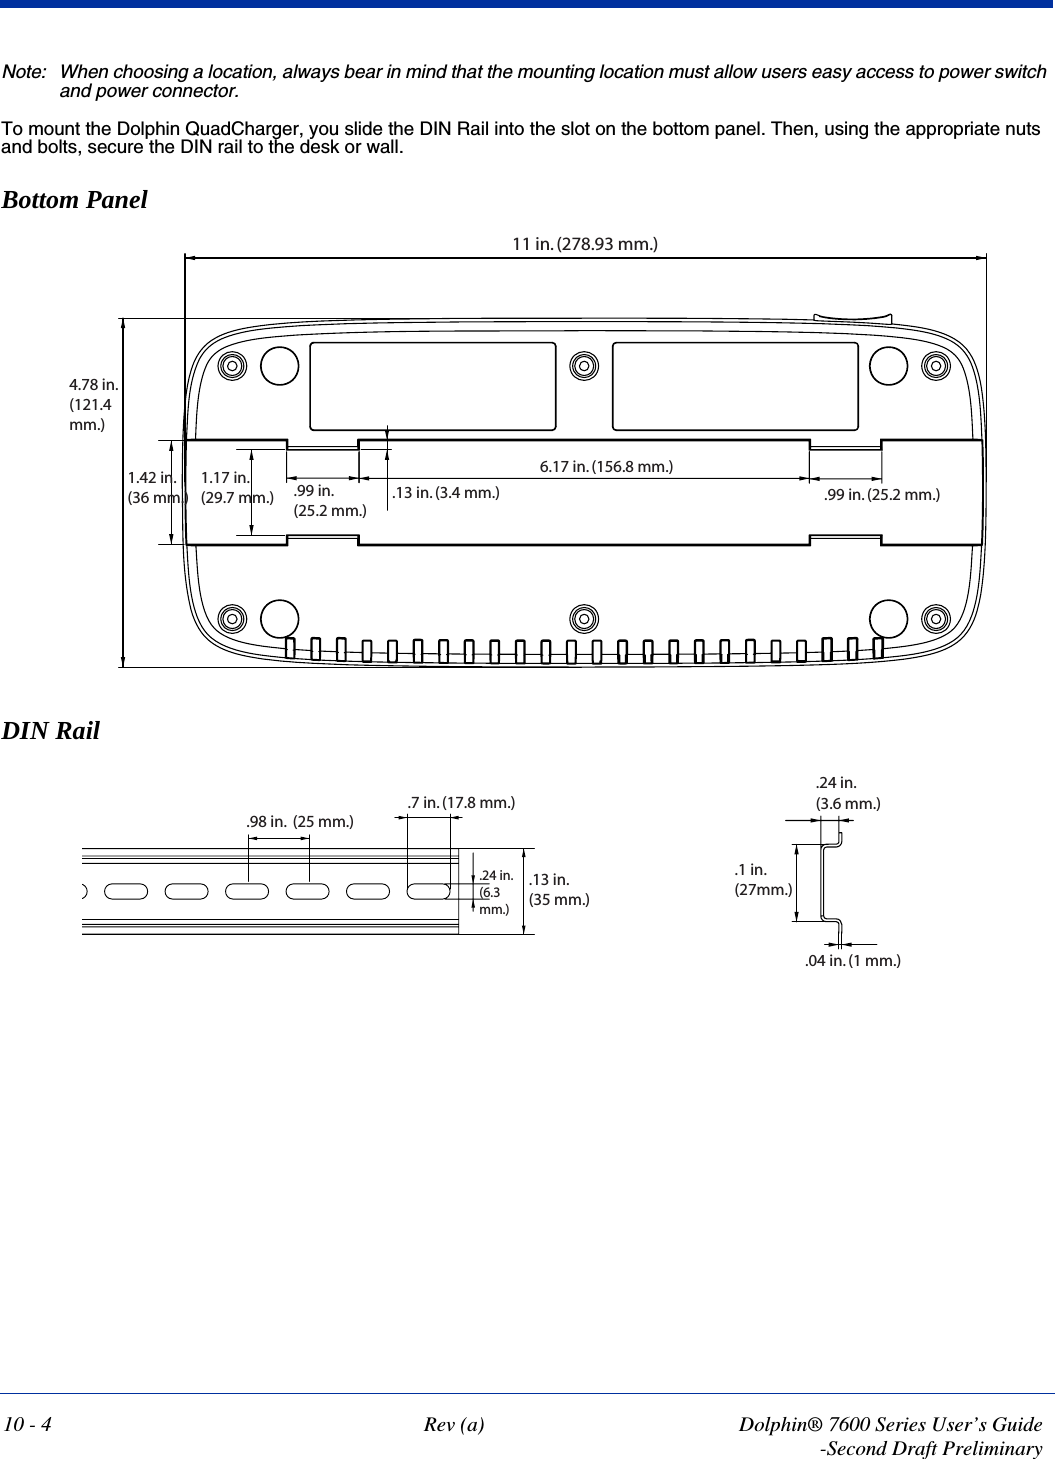 10 - 4 Rev (a) Dolphin® 7600 Series User’s Guide-Second Draft PreliminaryNote: When choosing a location, always bear in mind that the mounting location must allow users easy access to power switch and power connector.To mount the Dolphin QuadCharger, you slide the DIN Rail into the slot on the bottom panel. Then, using the appropriate nuts and bolts, secure the DIN rail to the desk or wall.  Bottom PanelDIN Rail11 in. (278.93 mm.)6.17 in. (156.8 mm.).99 in. (25.2 mm.).99 in. (25.2 mm.).13 in. (3.4 mm.)1.17 in.(29.7 mm.)1.42 in.(36 mm.)4.78 in.(121.4mm.).13 in. (35 mm.).24 in. (6.3mm.).98 in.  (25 mm.).7 in. (17.8 mm.).1 in. (27mm.).24 in. (3.6 mm.).04 in. (1 mm.)